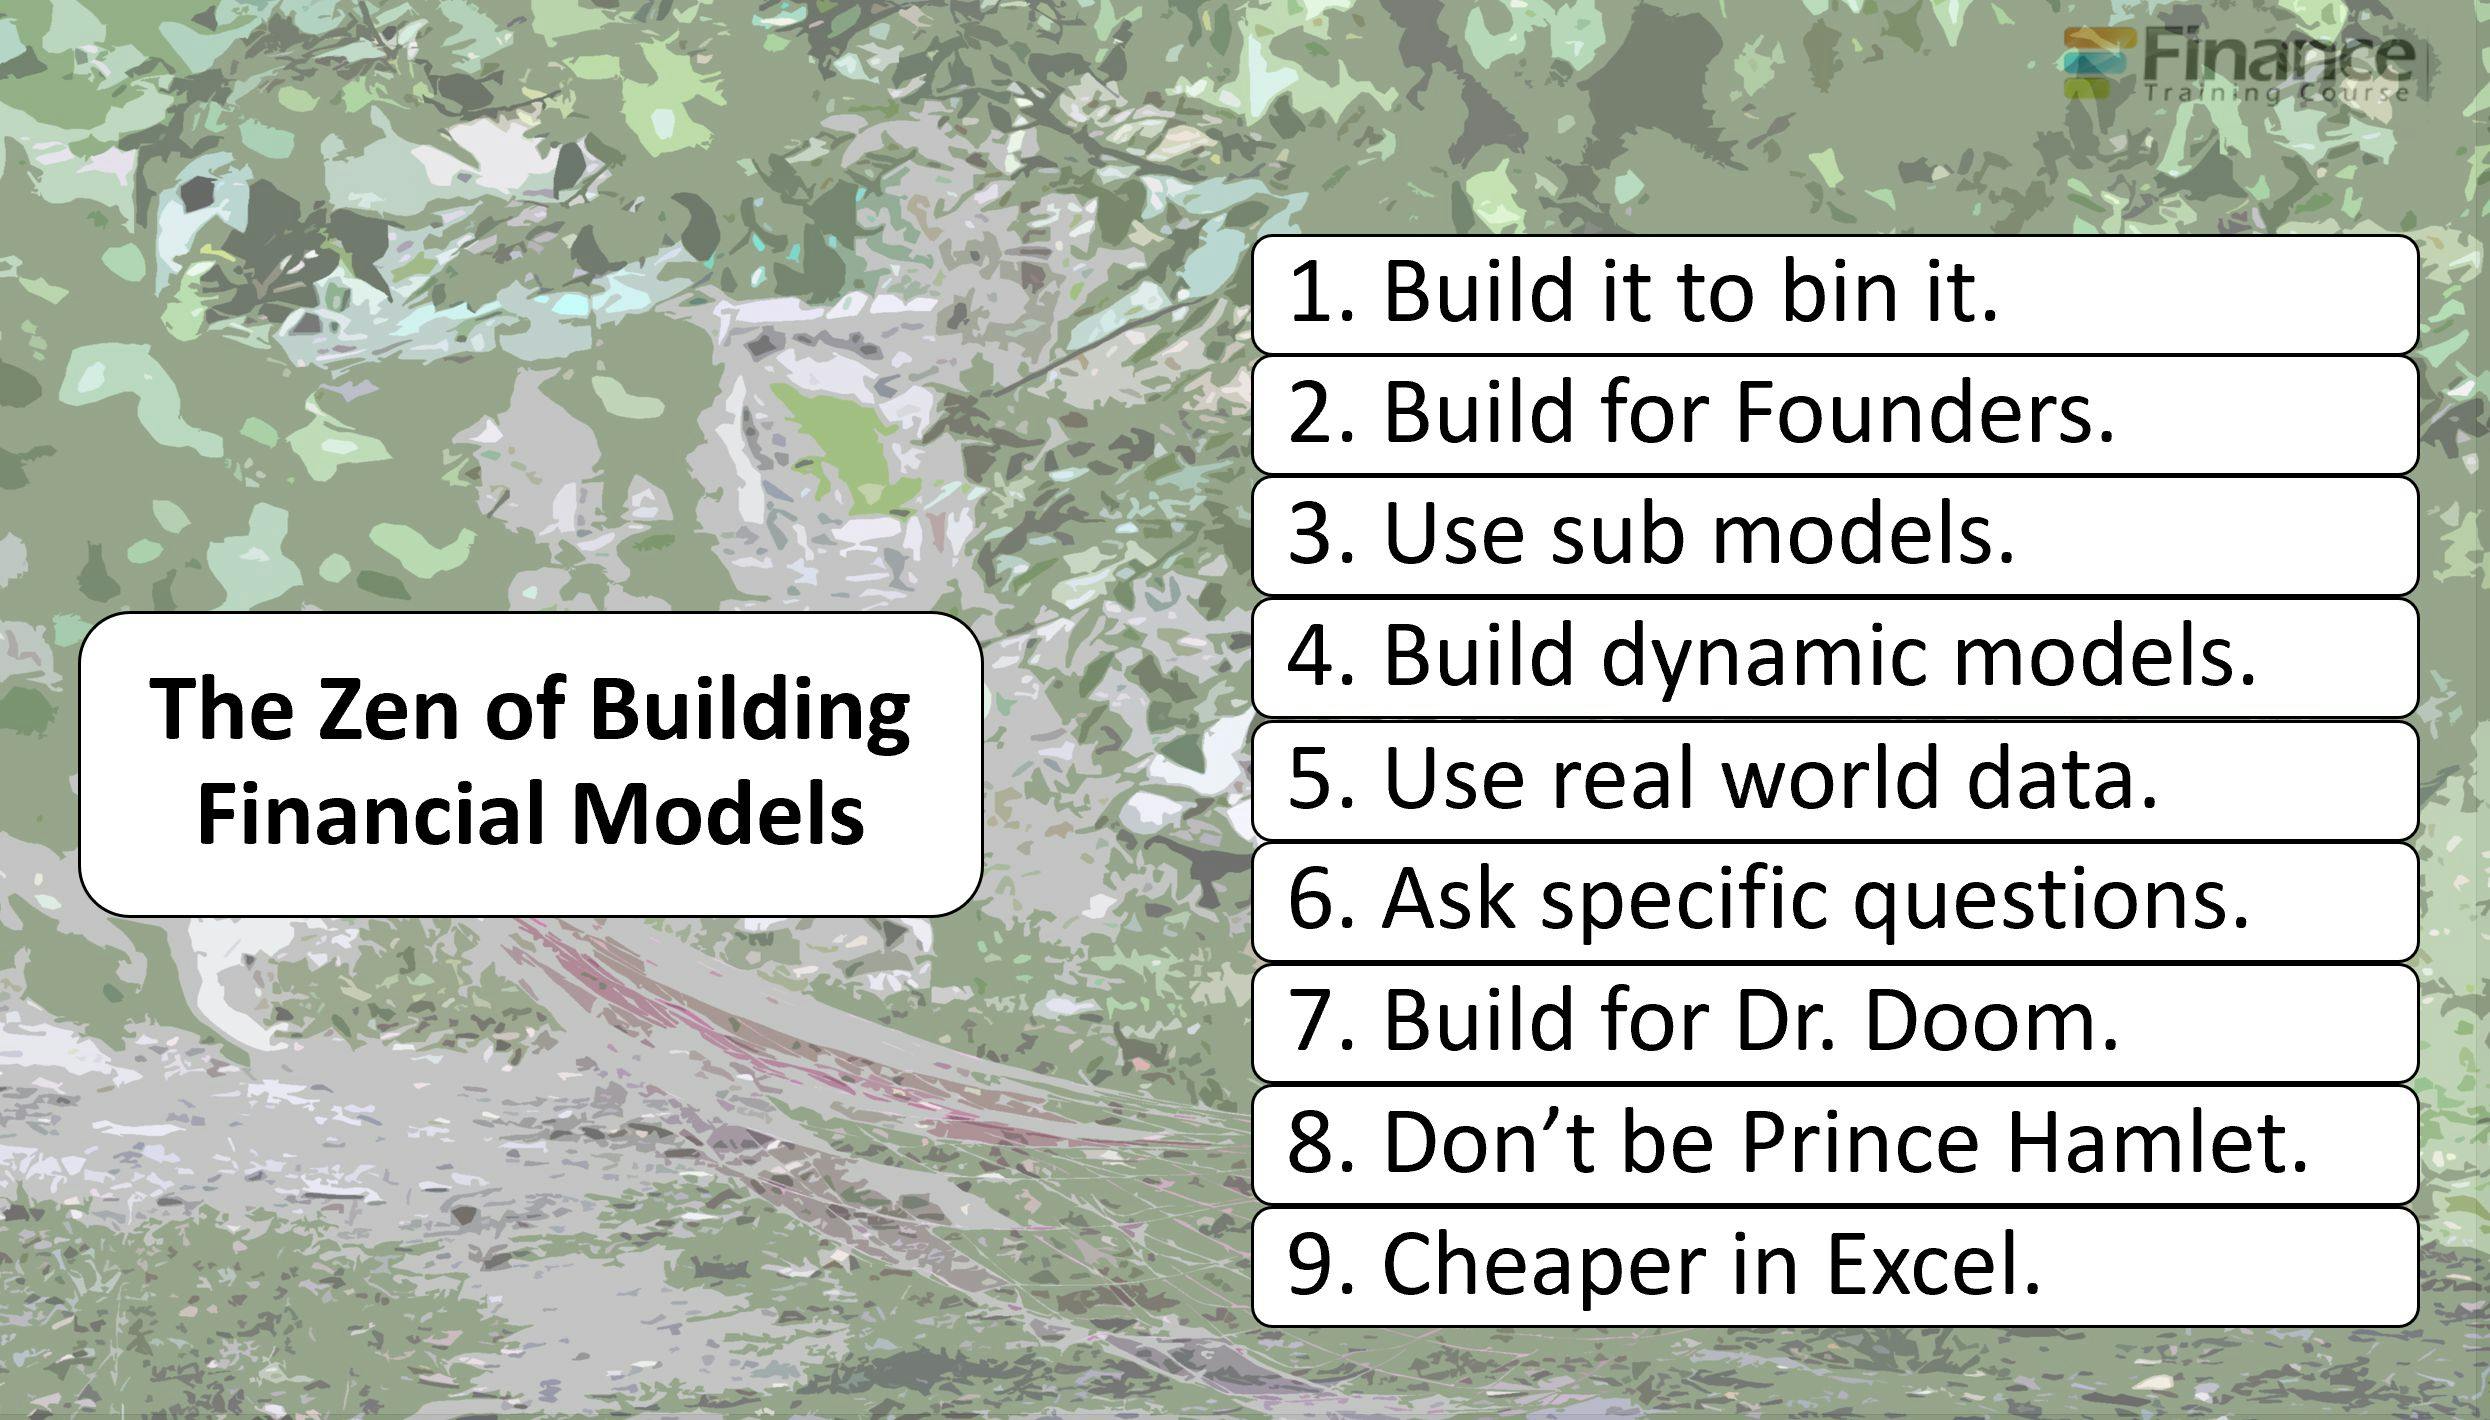 featured image - The Zen of Building Financial Models: 9 Tips for Startup Founders